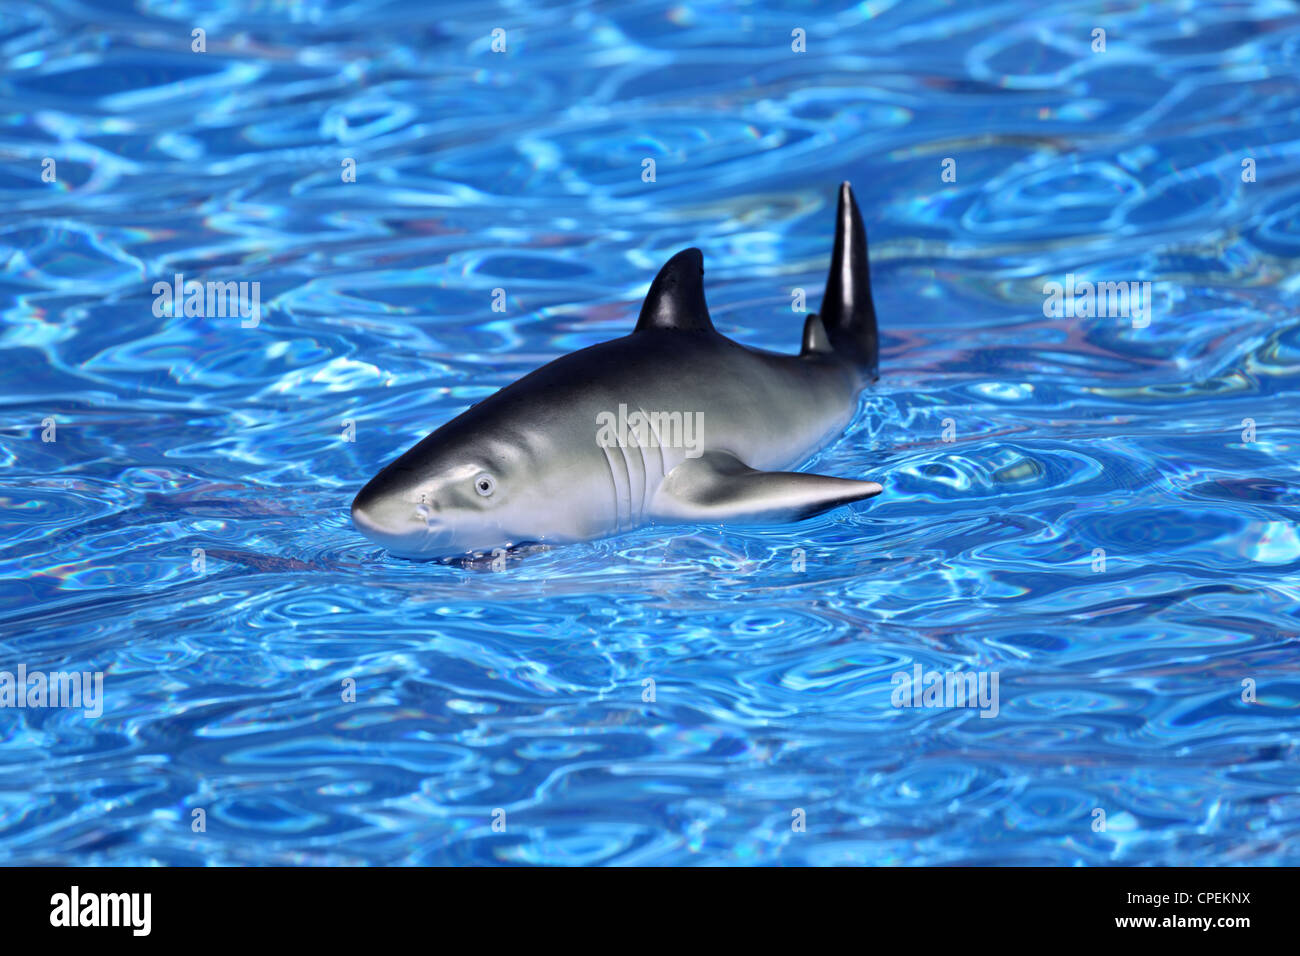 Toy shark in swimming pool Stock Photo